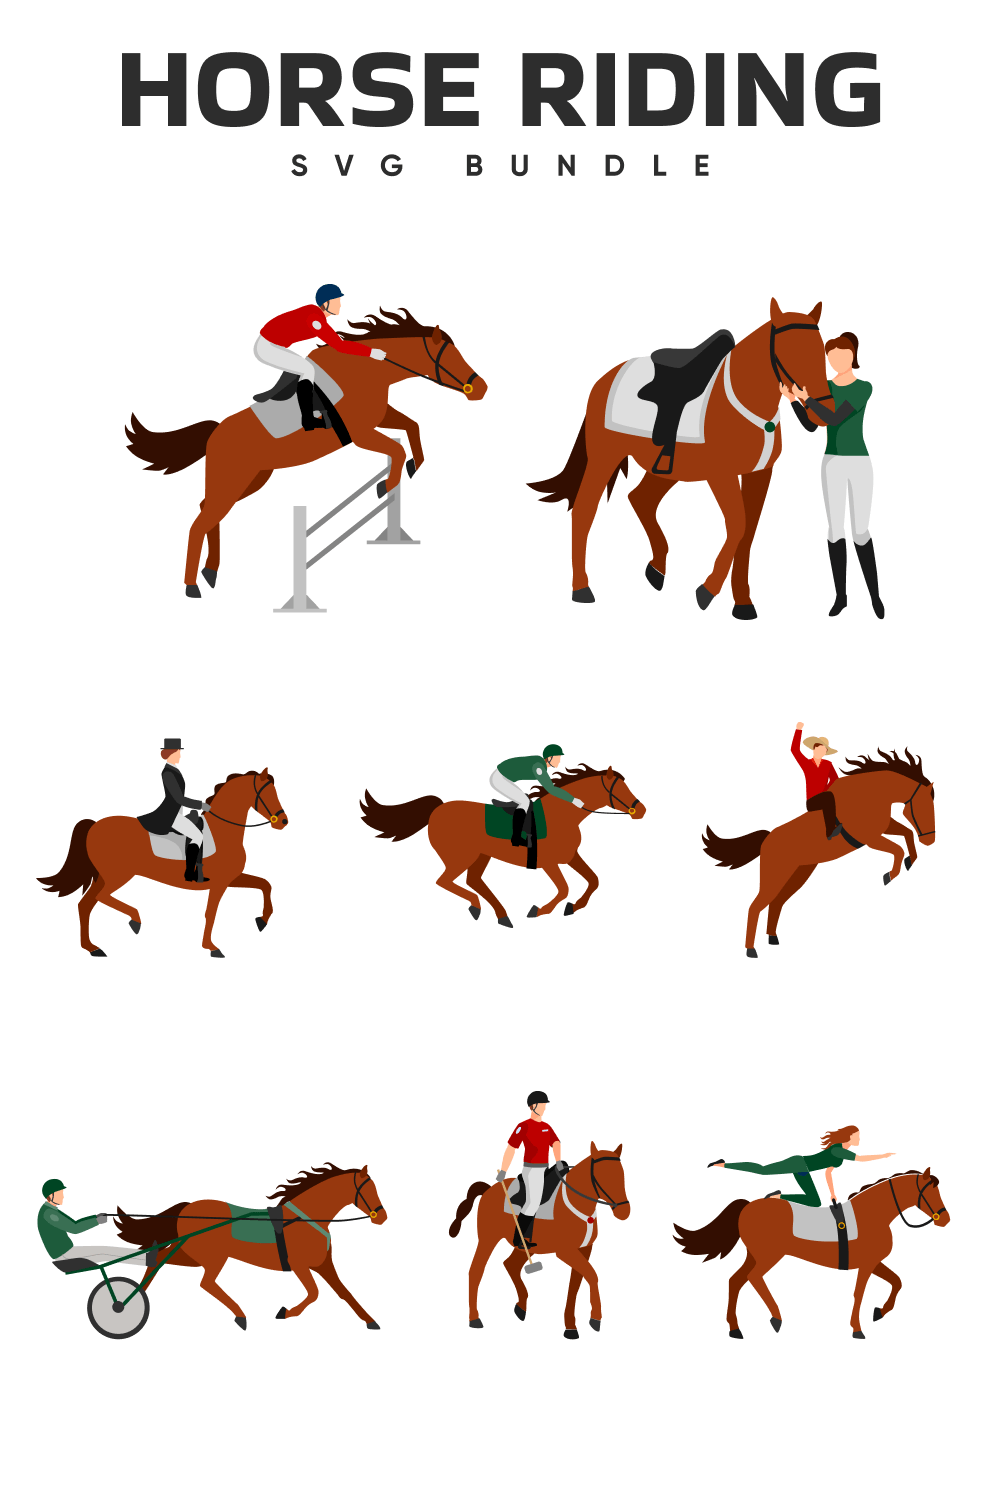 Horse riding game with horses and jockeys.